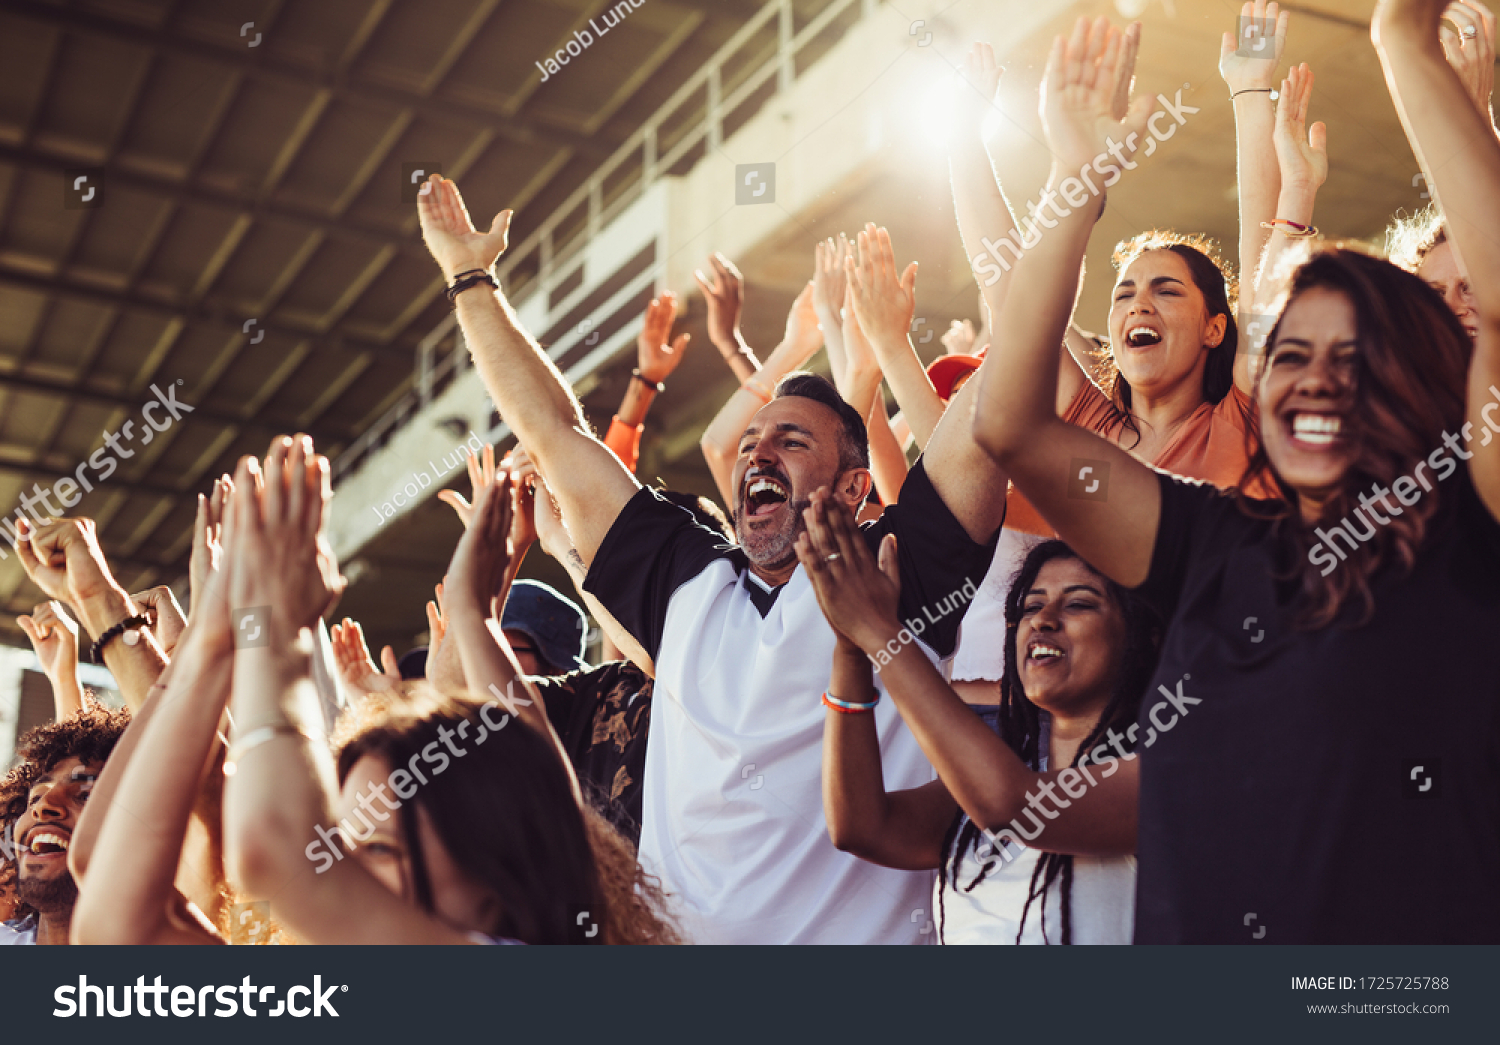 Crowd of sports fans cheering during a match in stadium. Excited people standing with their arms raised, clapping and yelling to encourage their team. #1725725788